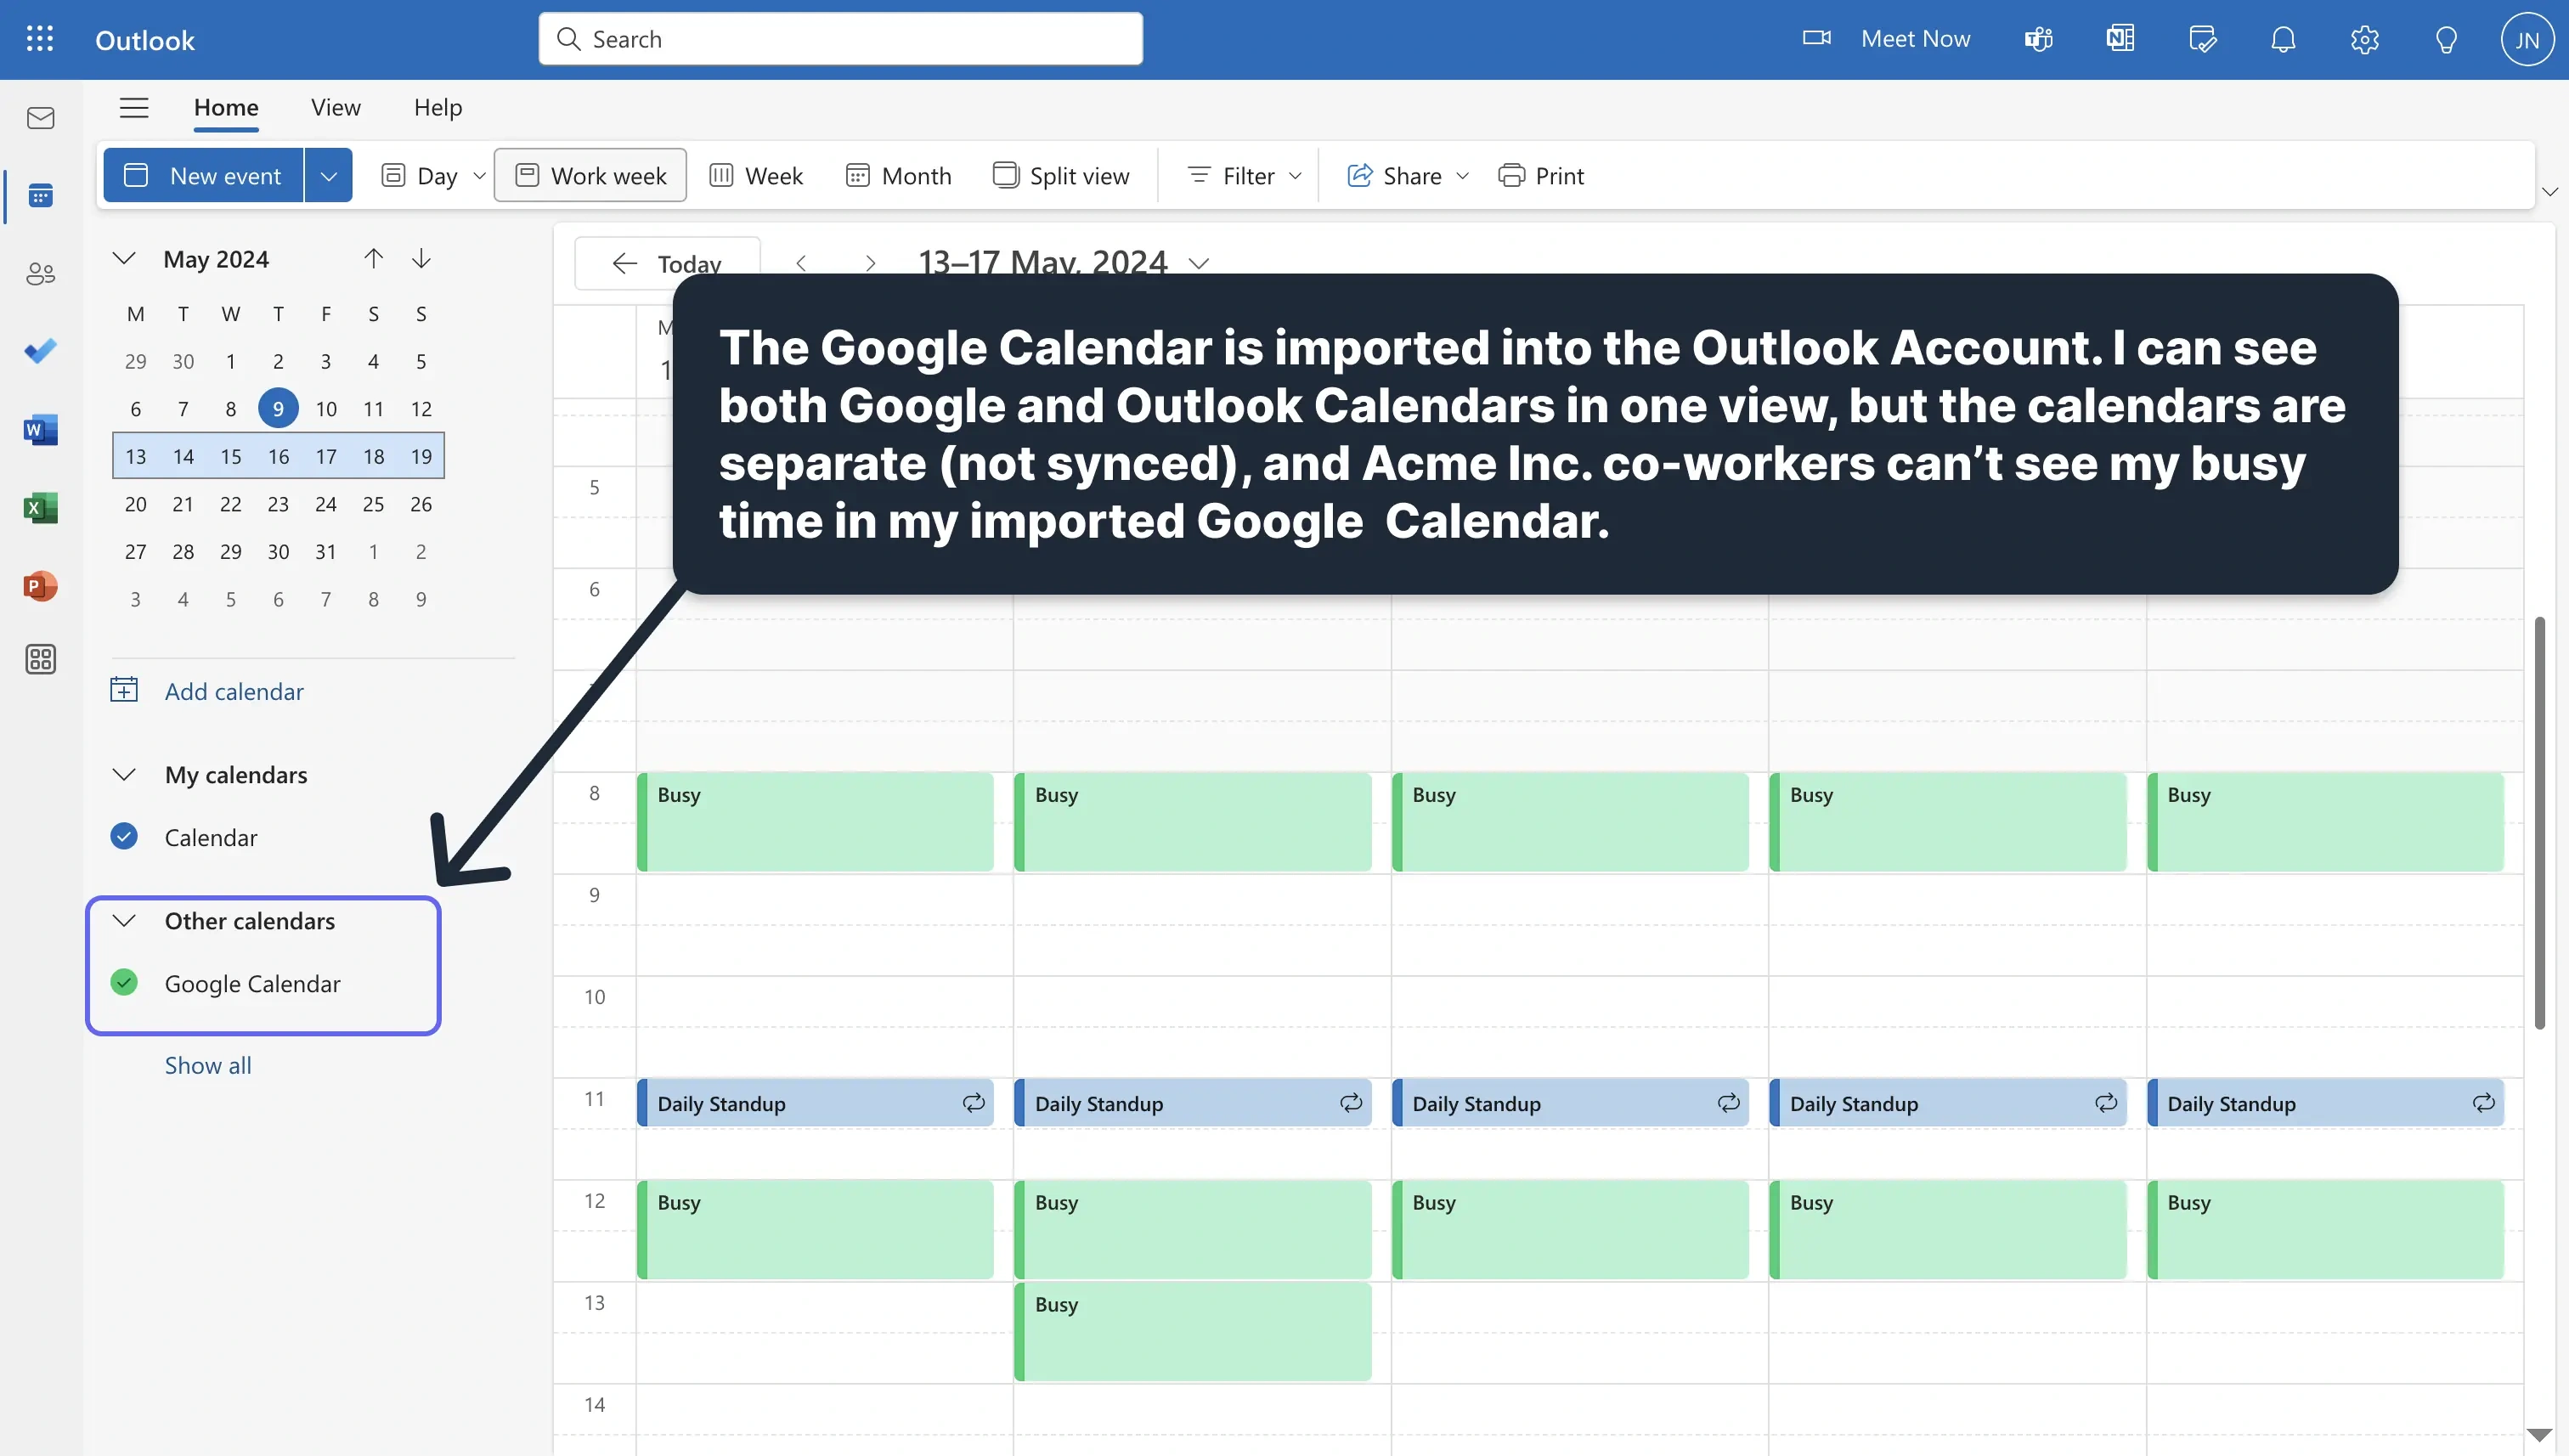 Illustration explaining why importing Google Calendar into Outlook doesn't sync the calendars